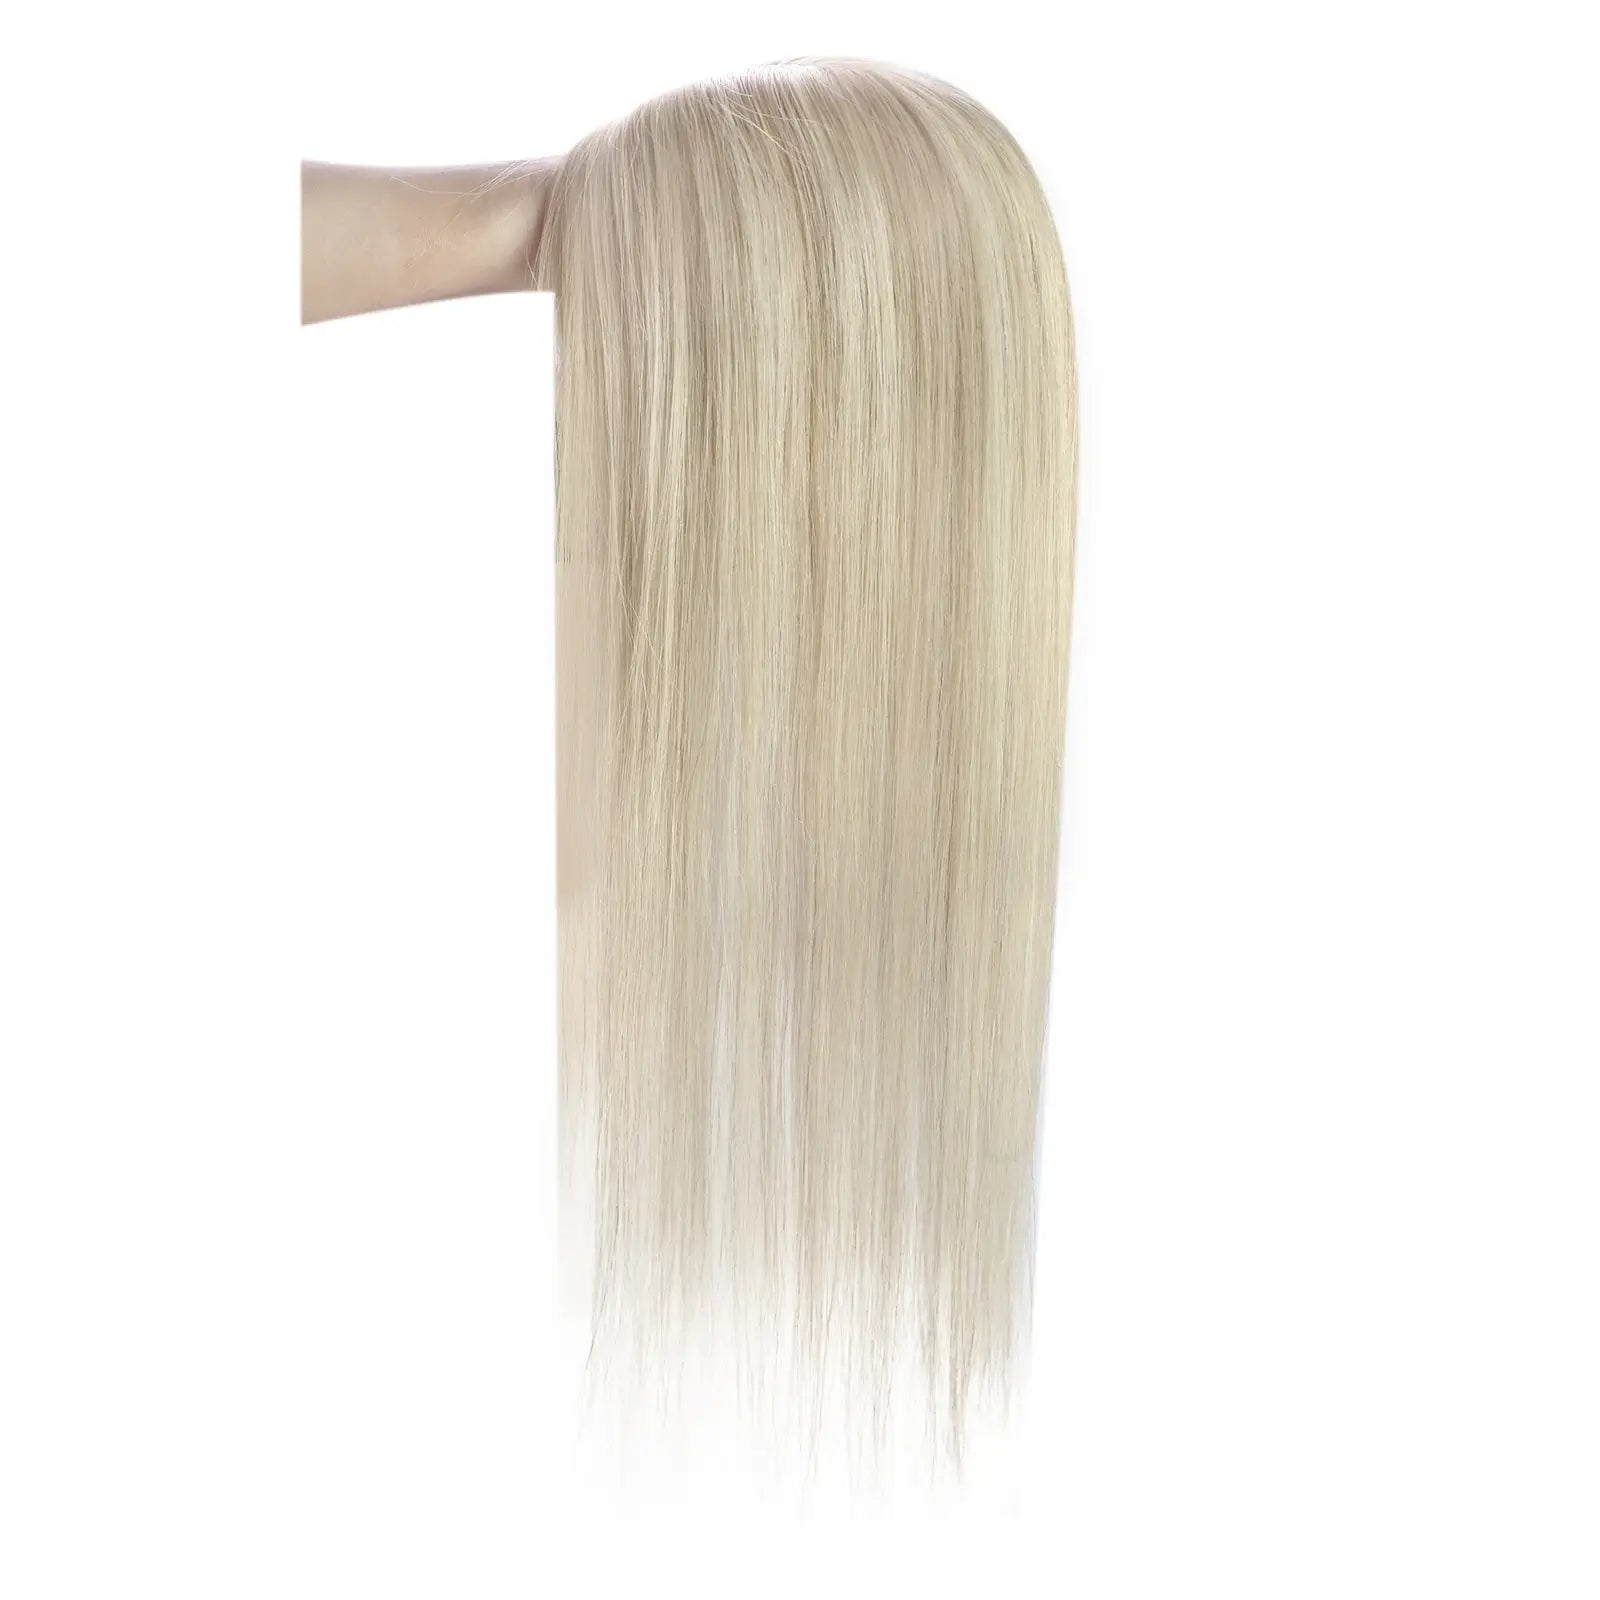 blonde highlighted human hair topper for loss hair